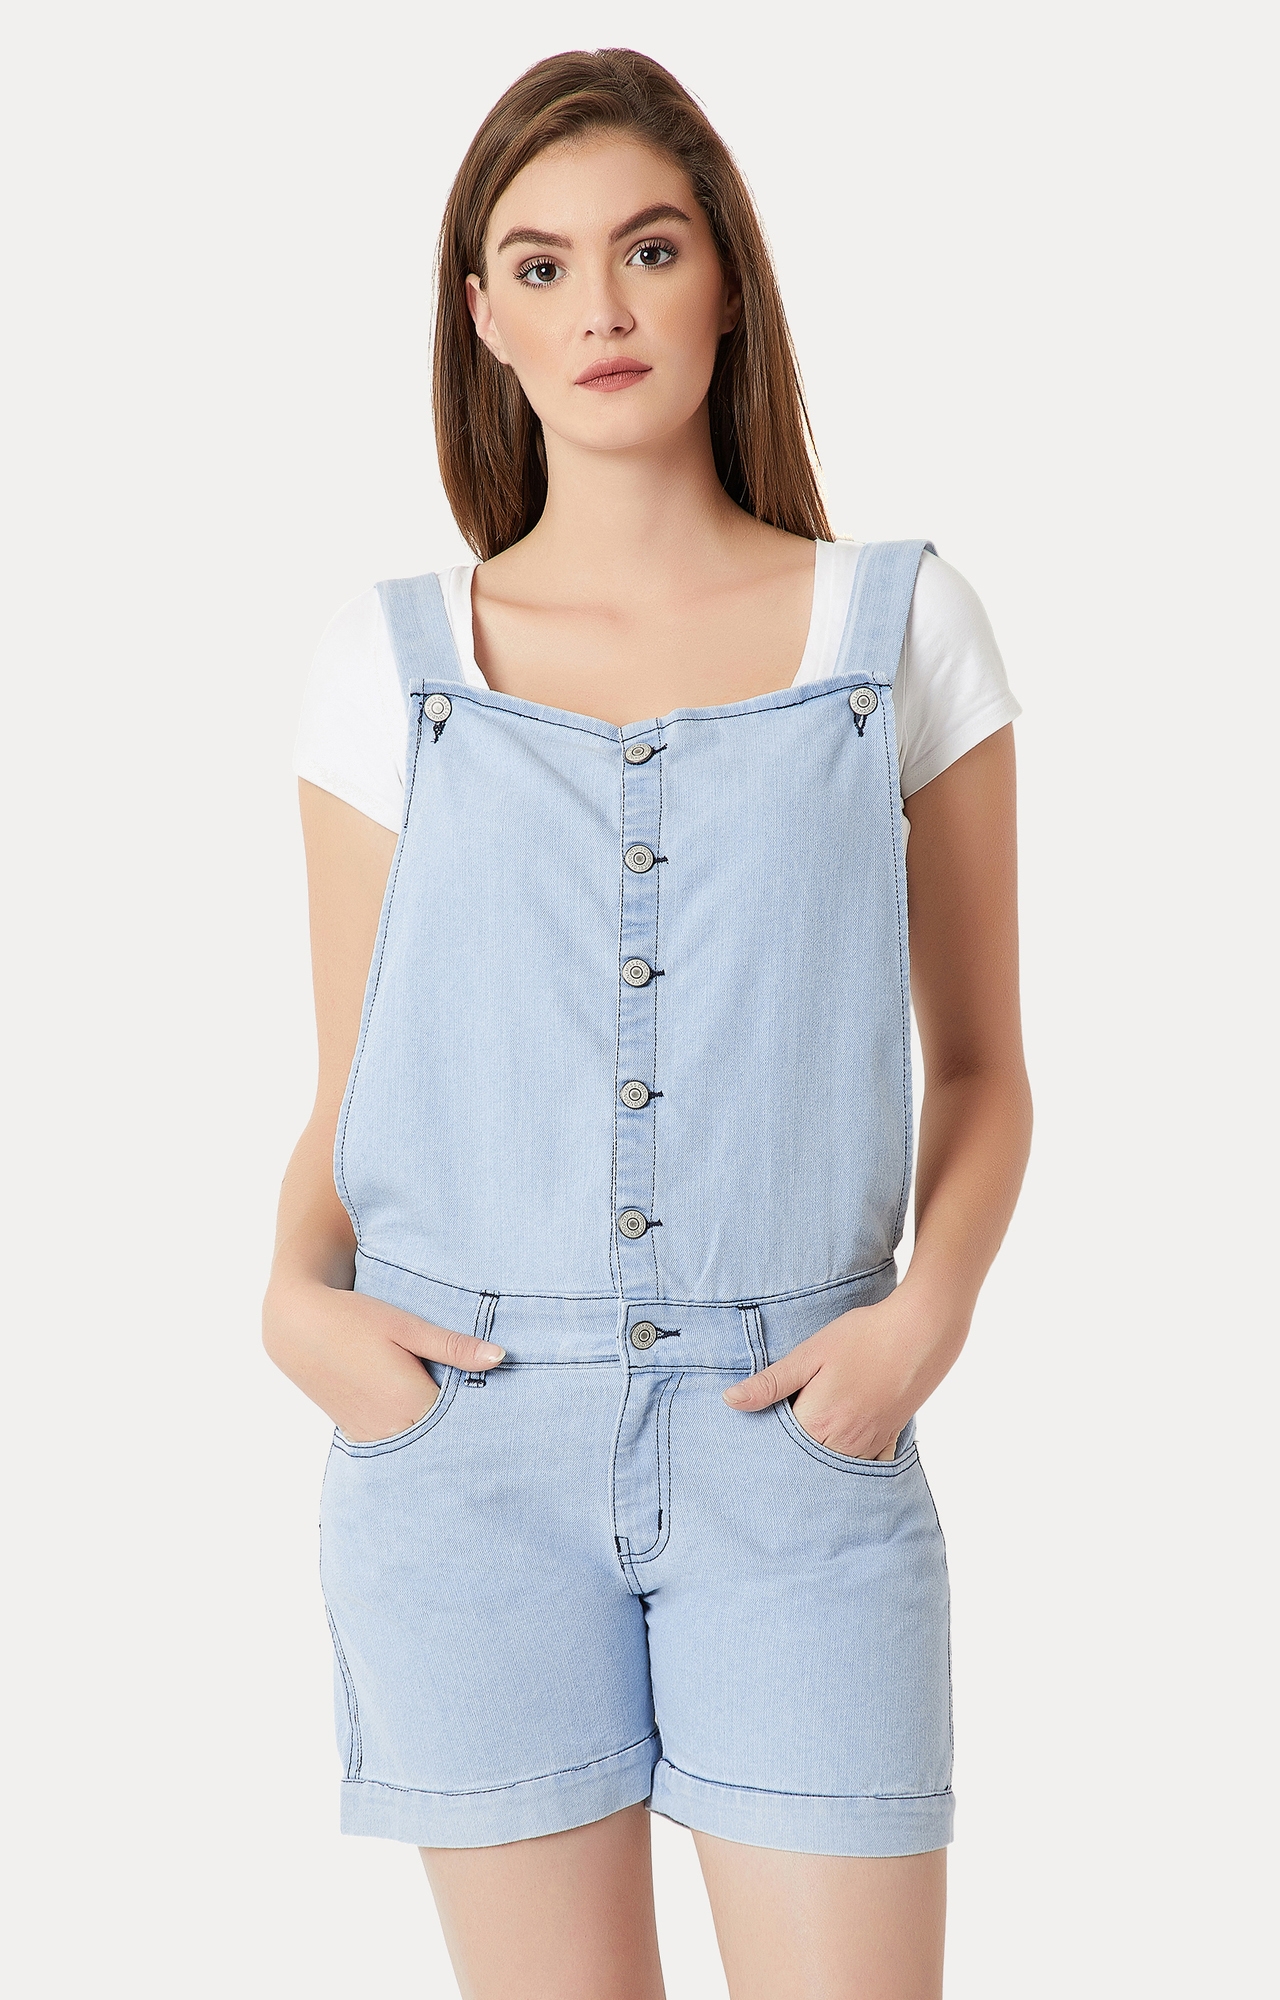 MISS CHASE | Women's Blue Denim SolidCasualwear Dungarees